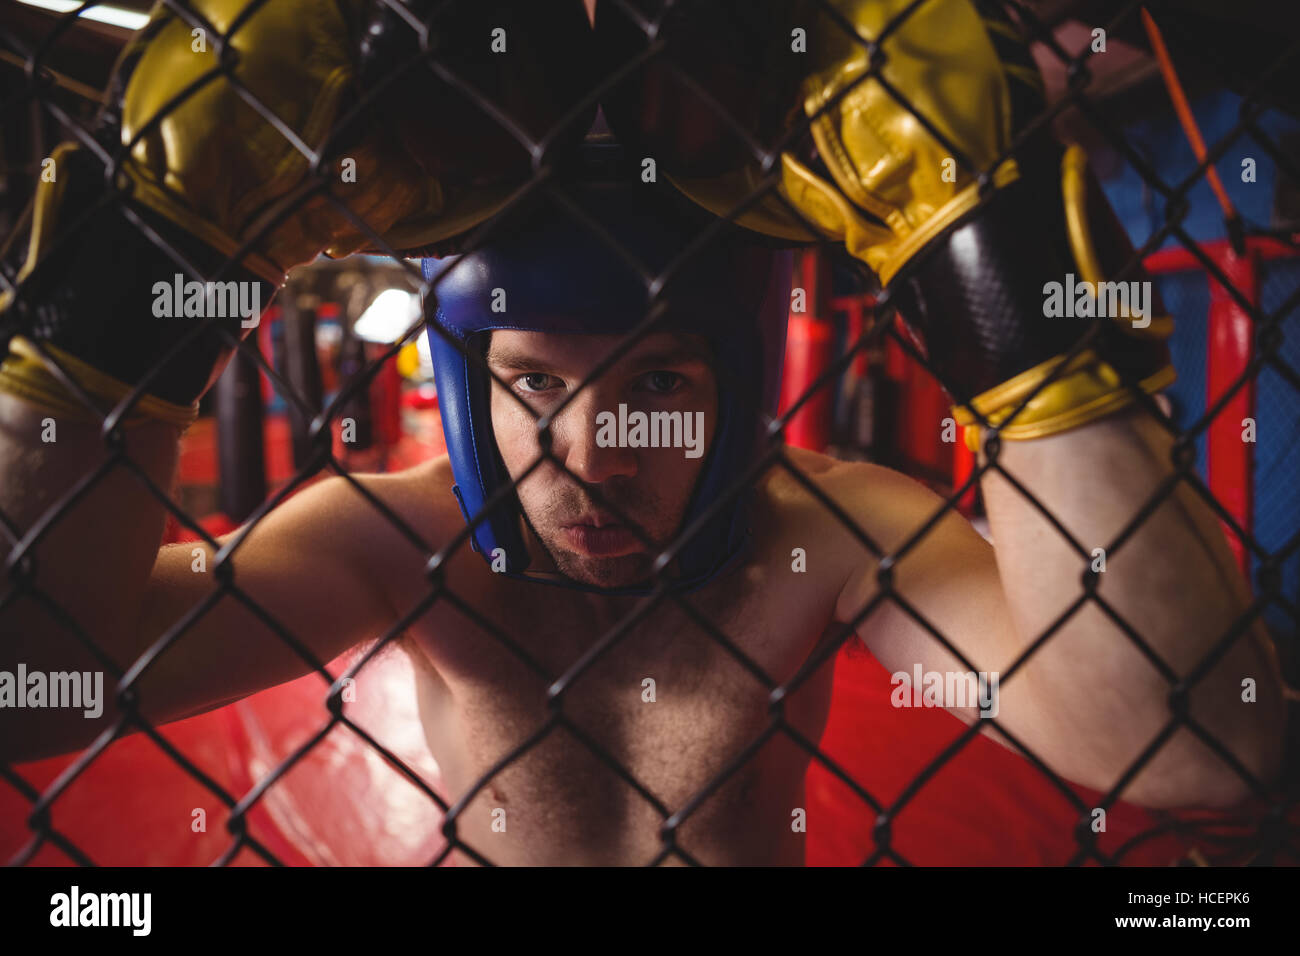 Boxer leaning on wire mesh fence Stock Photo